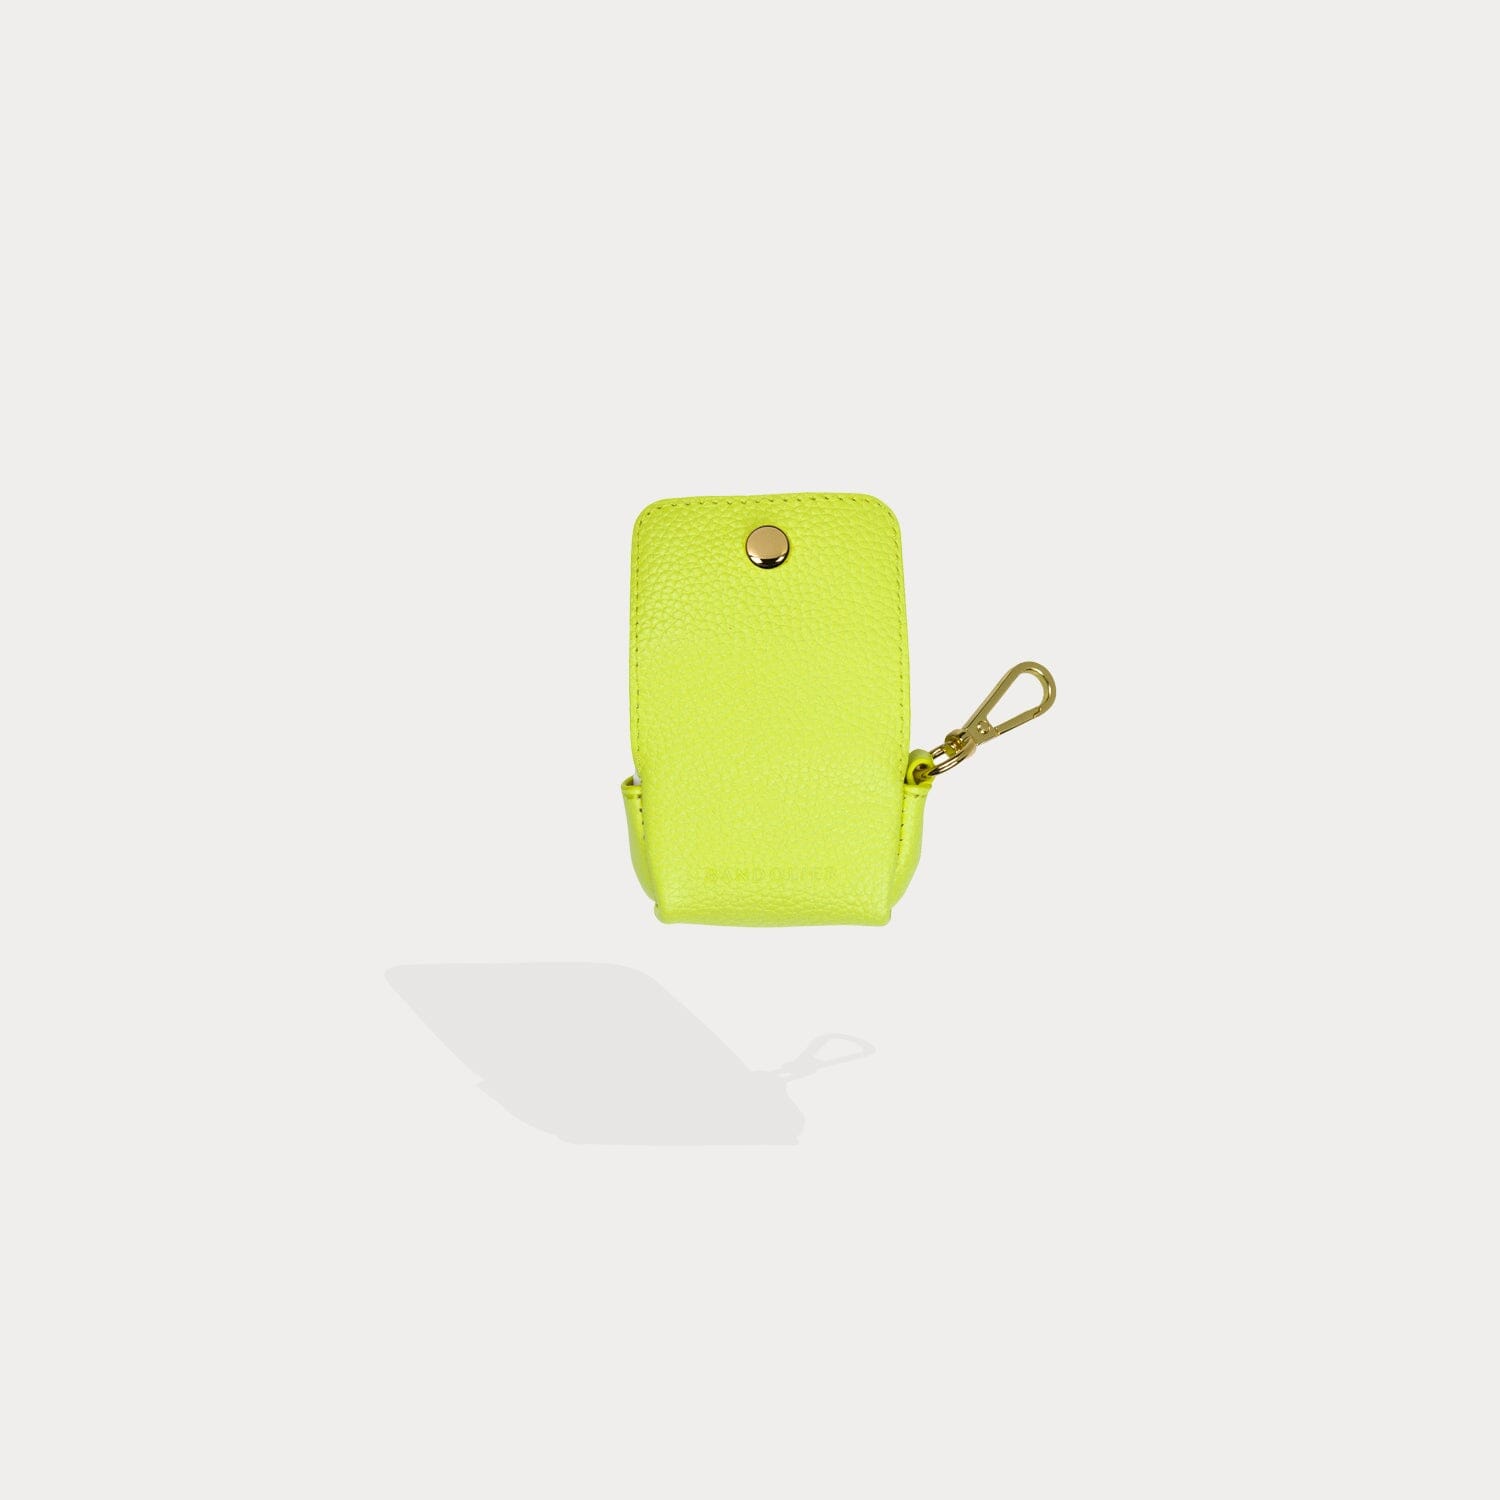 Avery AirPod Clip-On Pouch - Neon Yellow/Gold Pouch Core Bandolier 